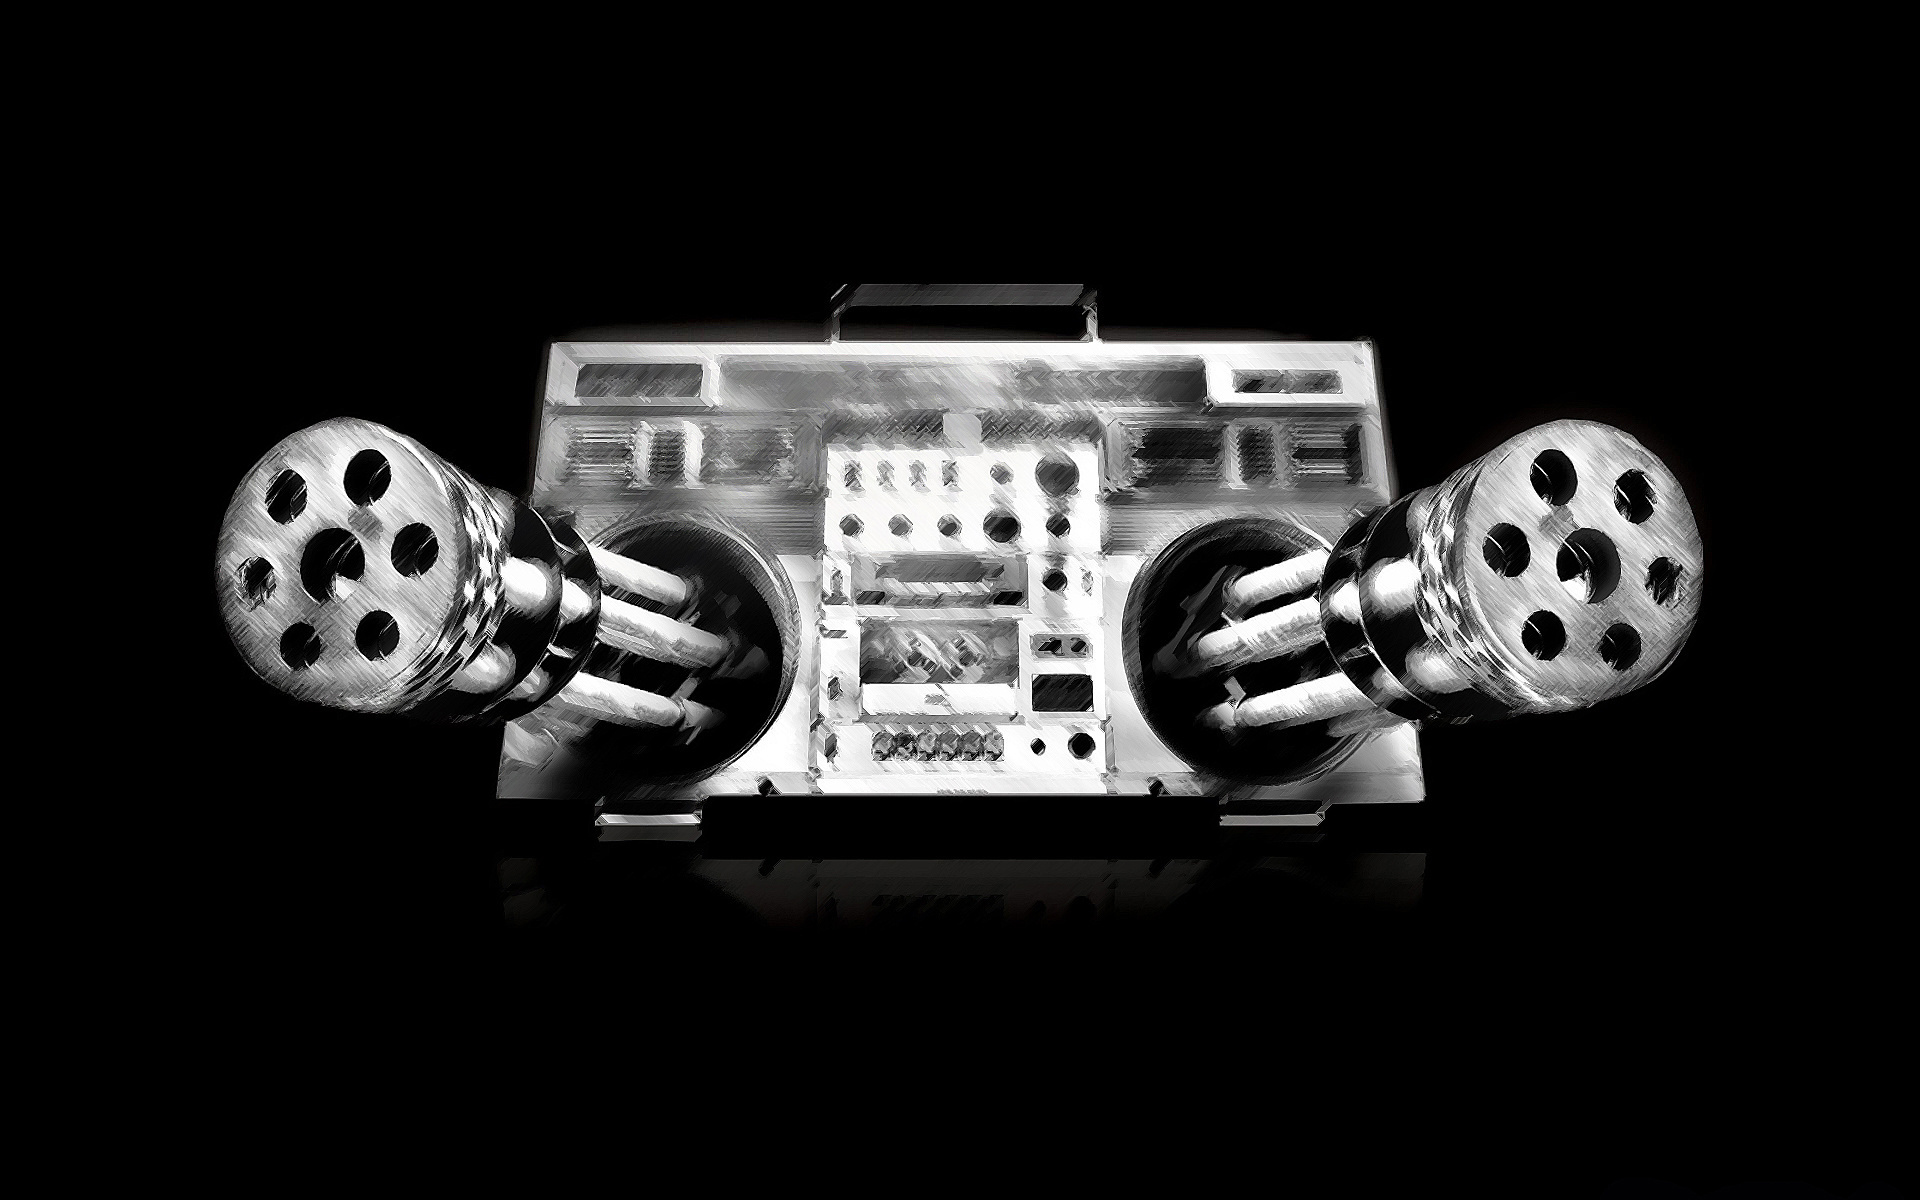 Music Cassette Player HD Wallpaper | Background Image